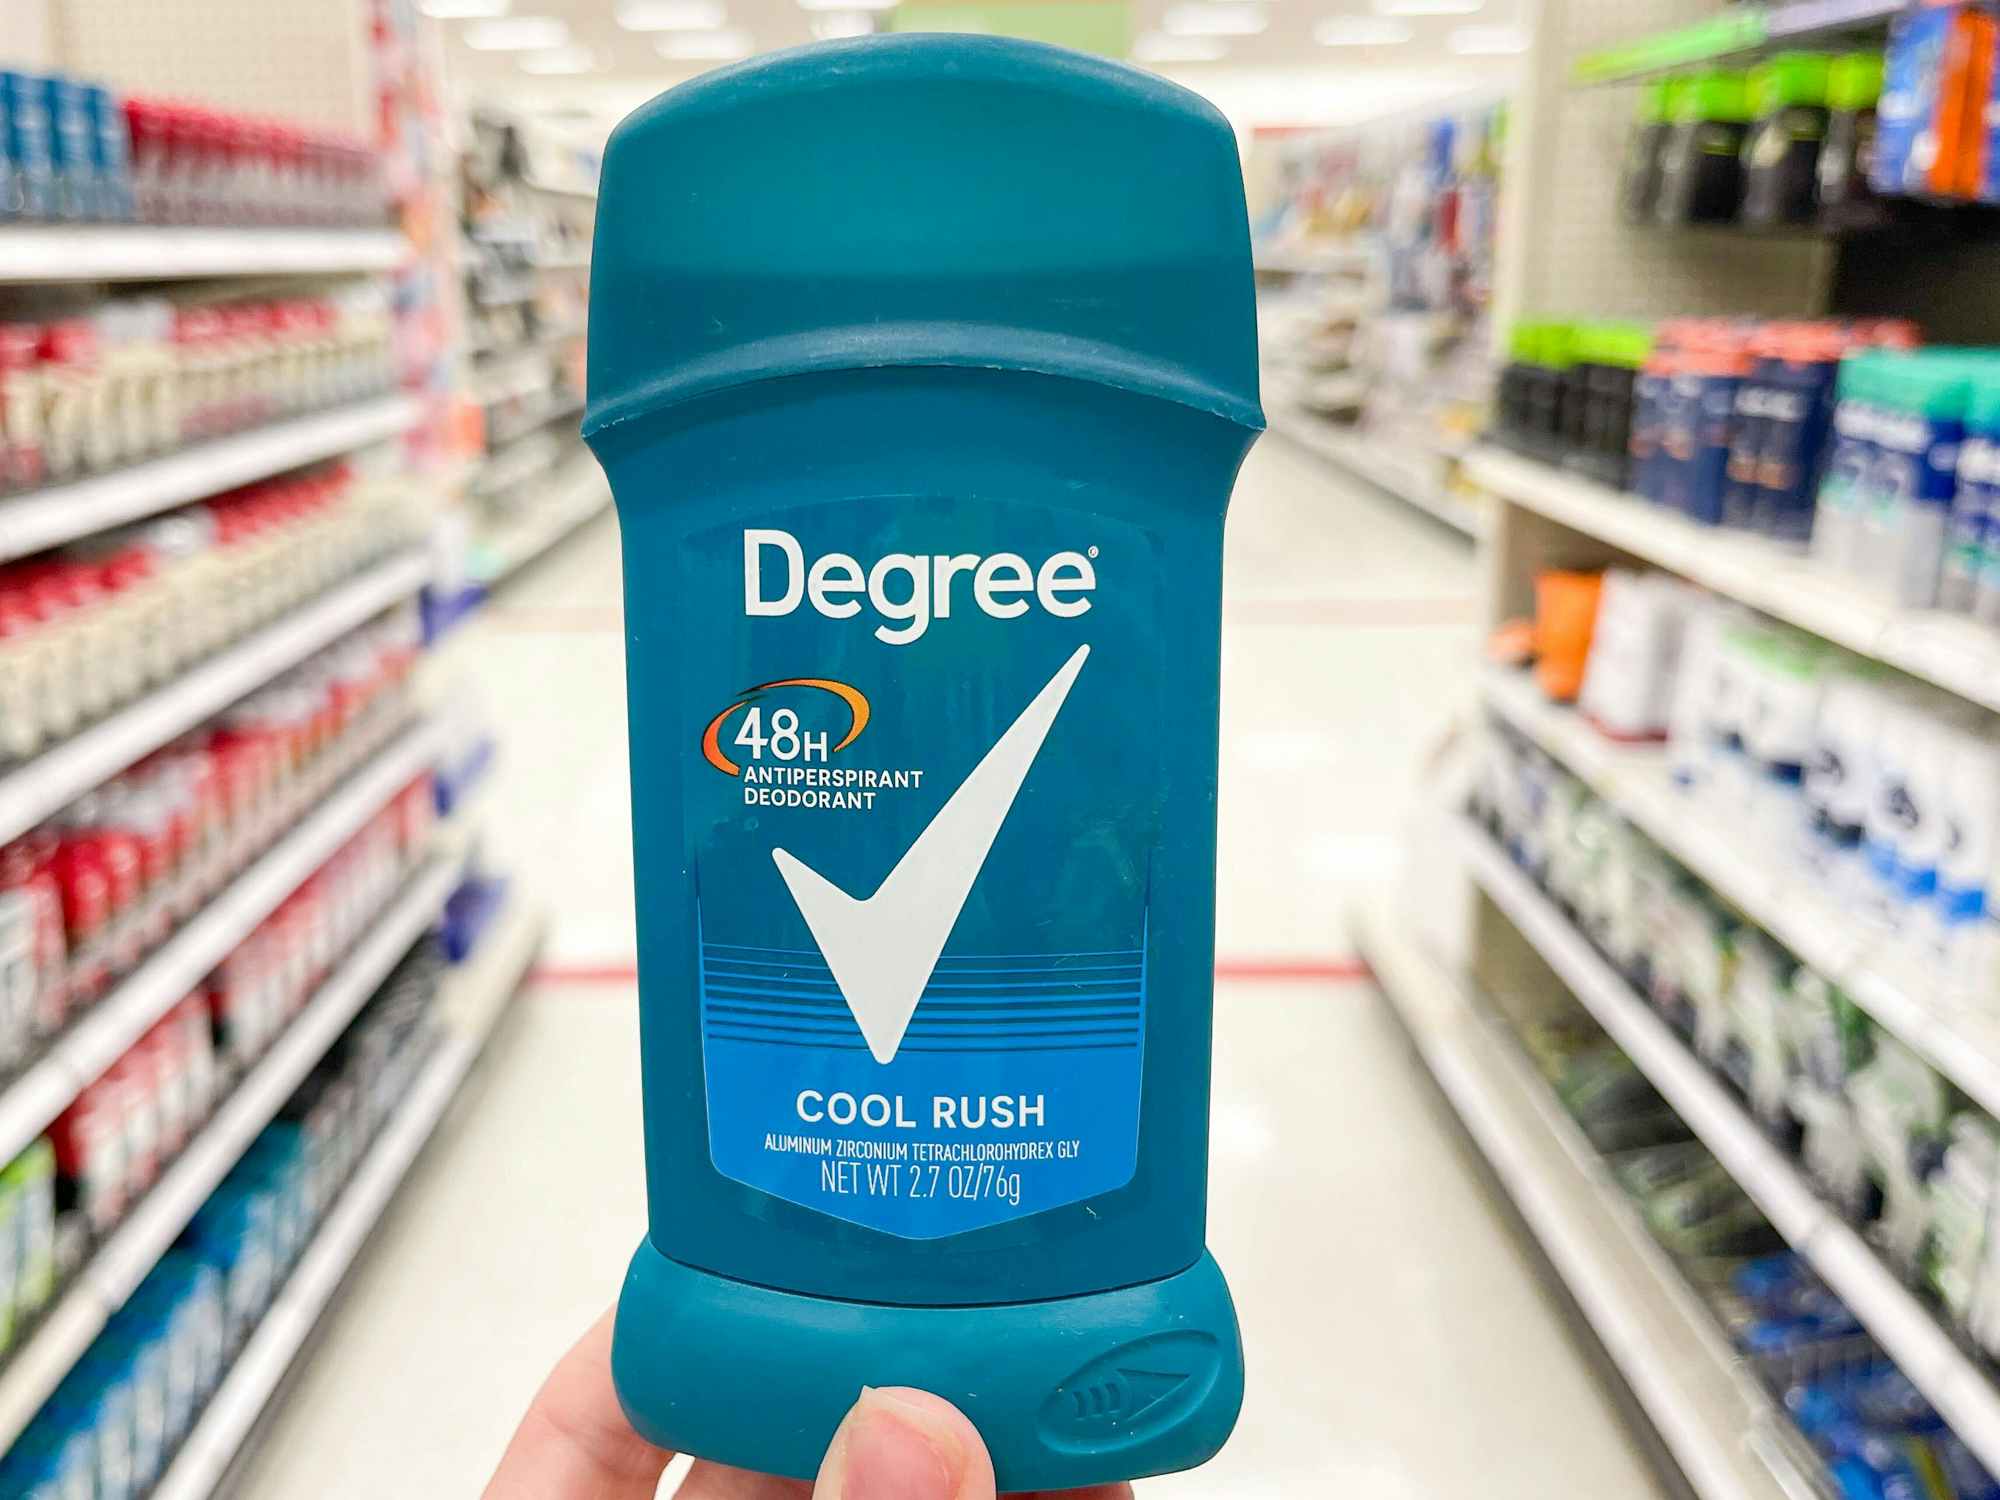 embarrassing-things-to-buy-in-store-online-shopping-target-degree-mens-deodorant